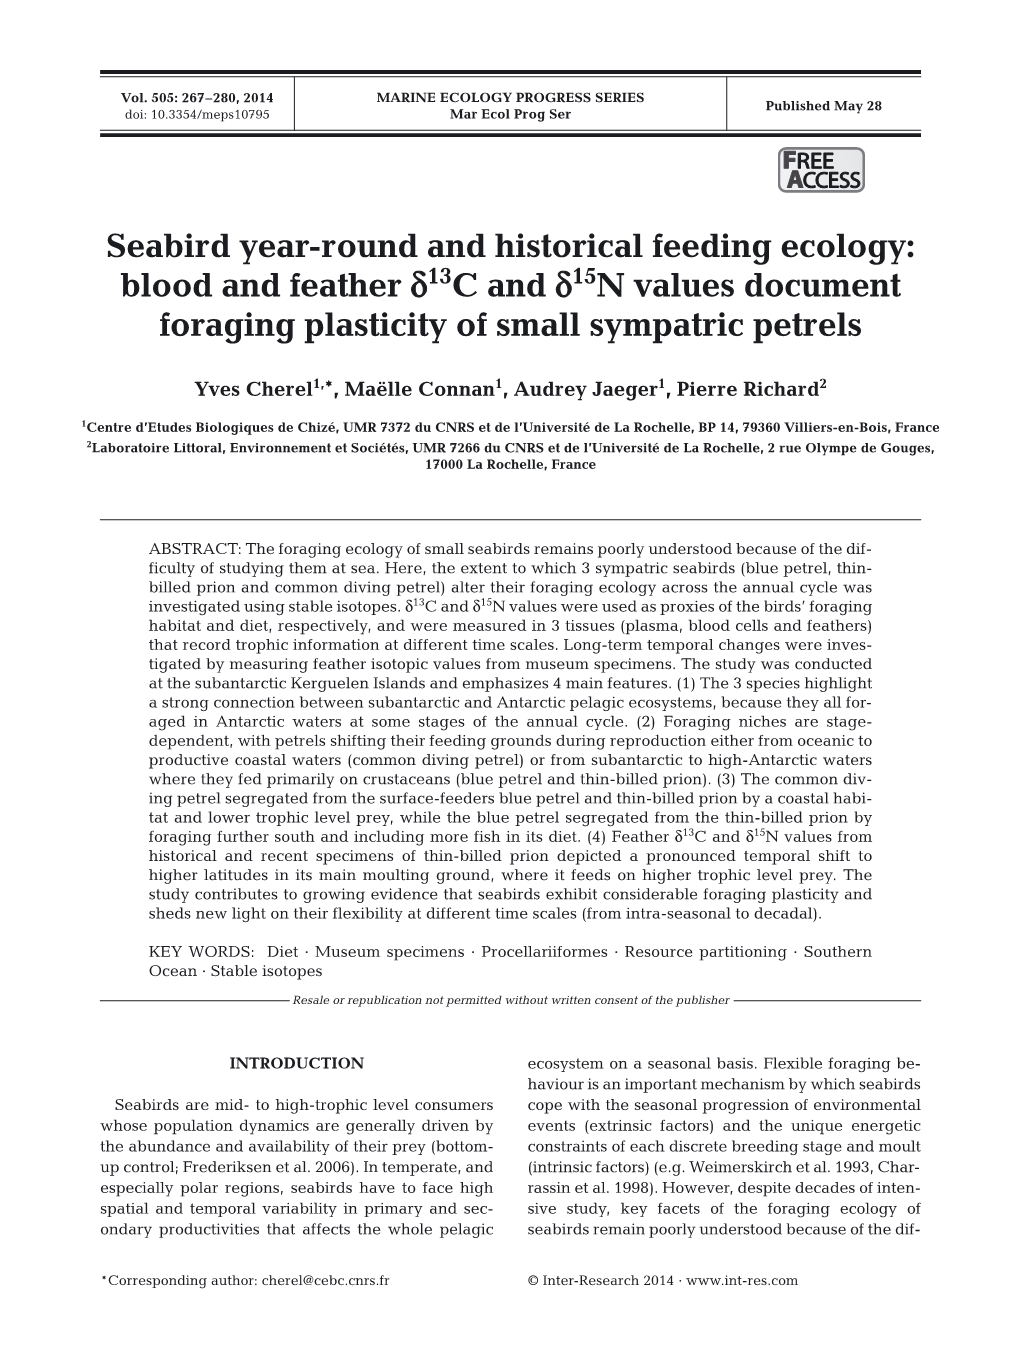 Seabird Year-Round and Historical Feeding Ecology: Blood and Feather Δ13c and Δ15n Values Document Foraging Plasticity of Small Sympatric Petrels